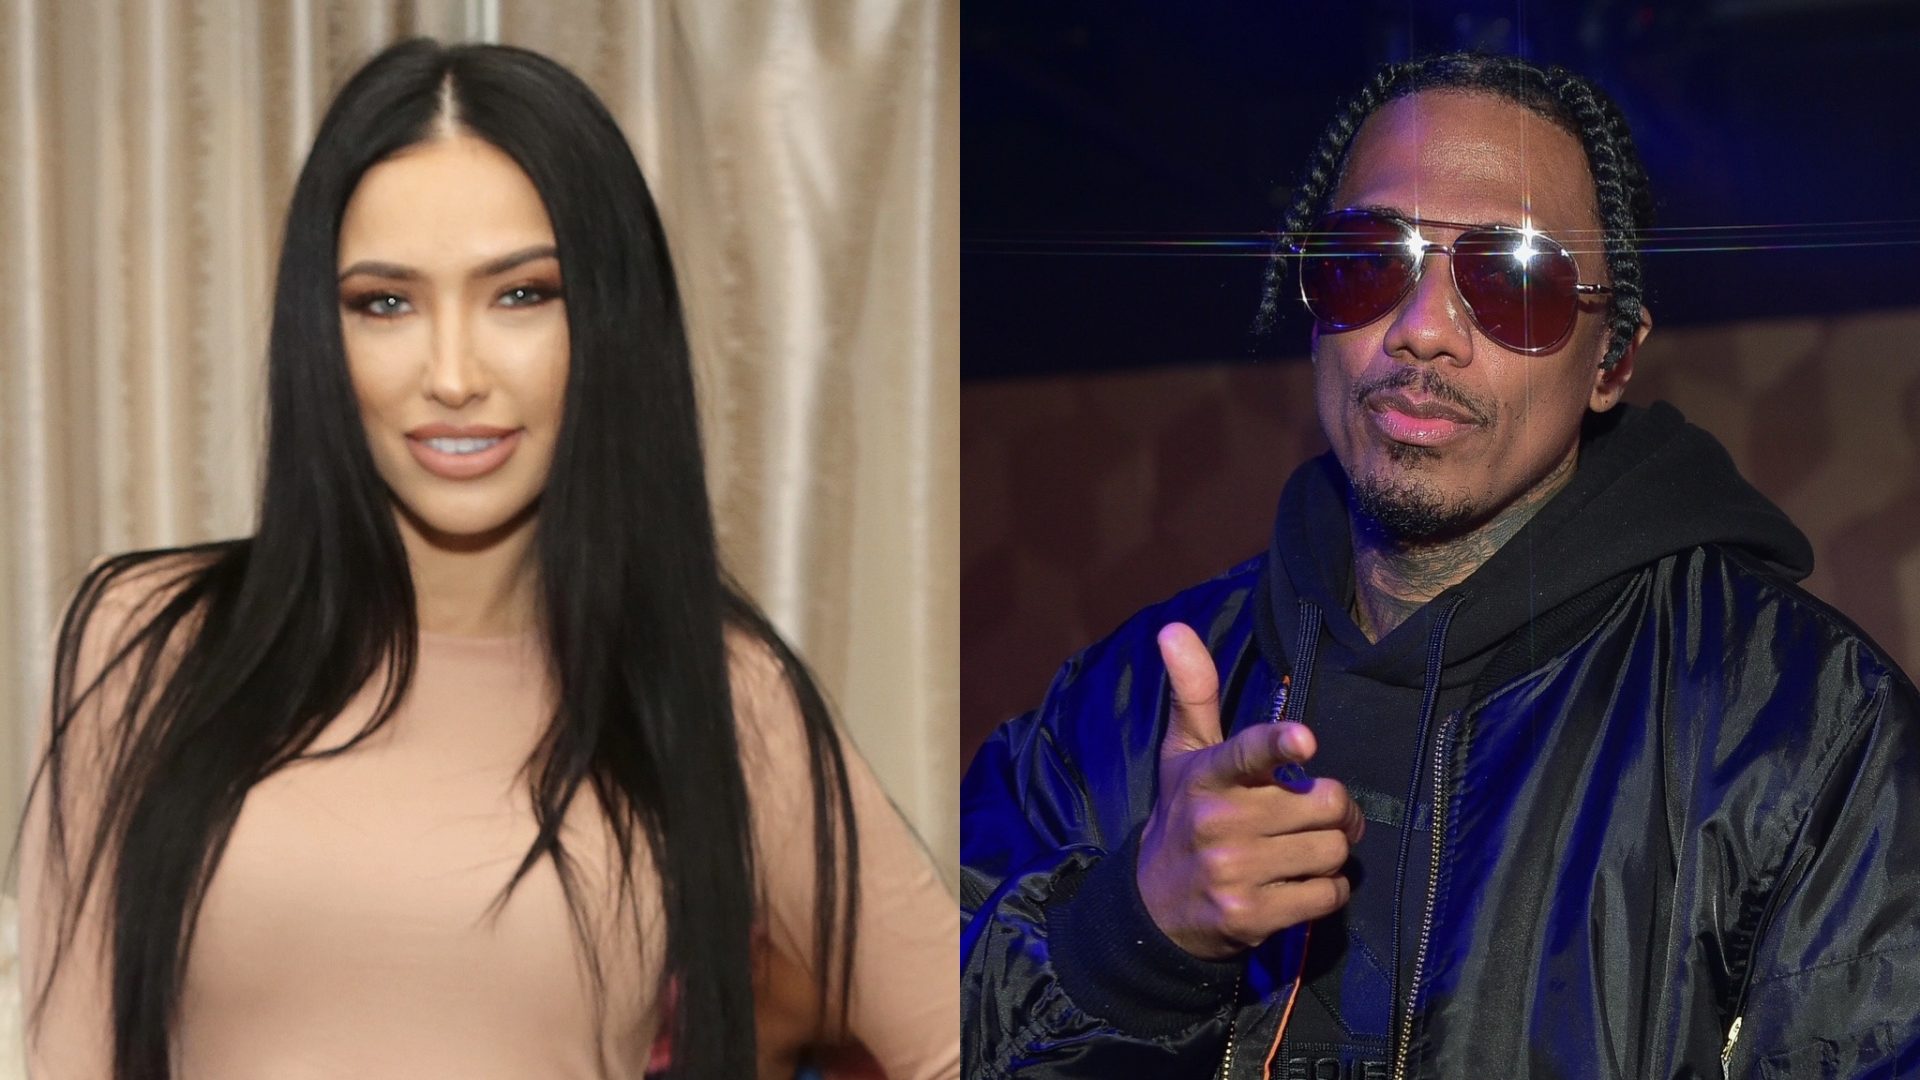 Bre Tiesi Says Nick Cannon Is 'Open' To More Kids With Her